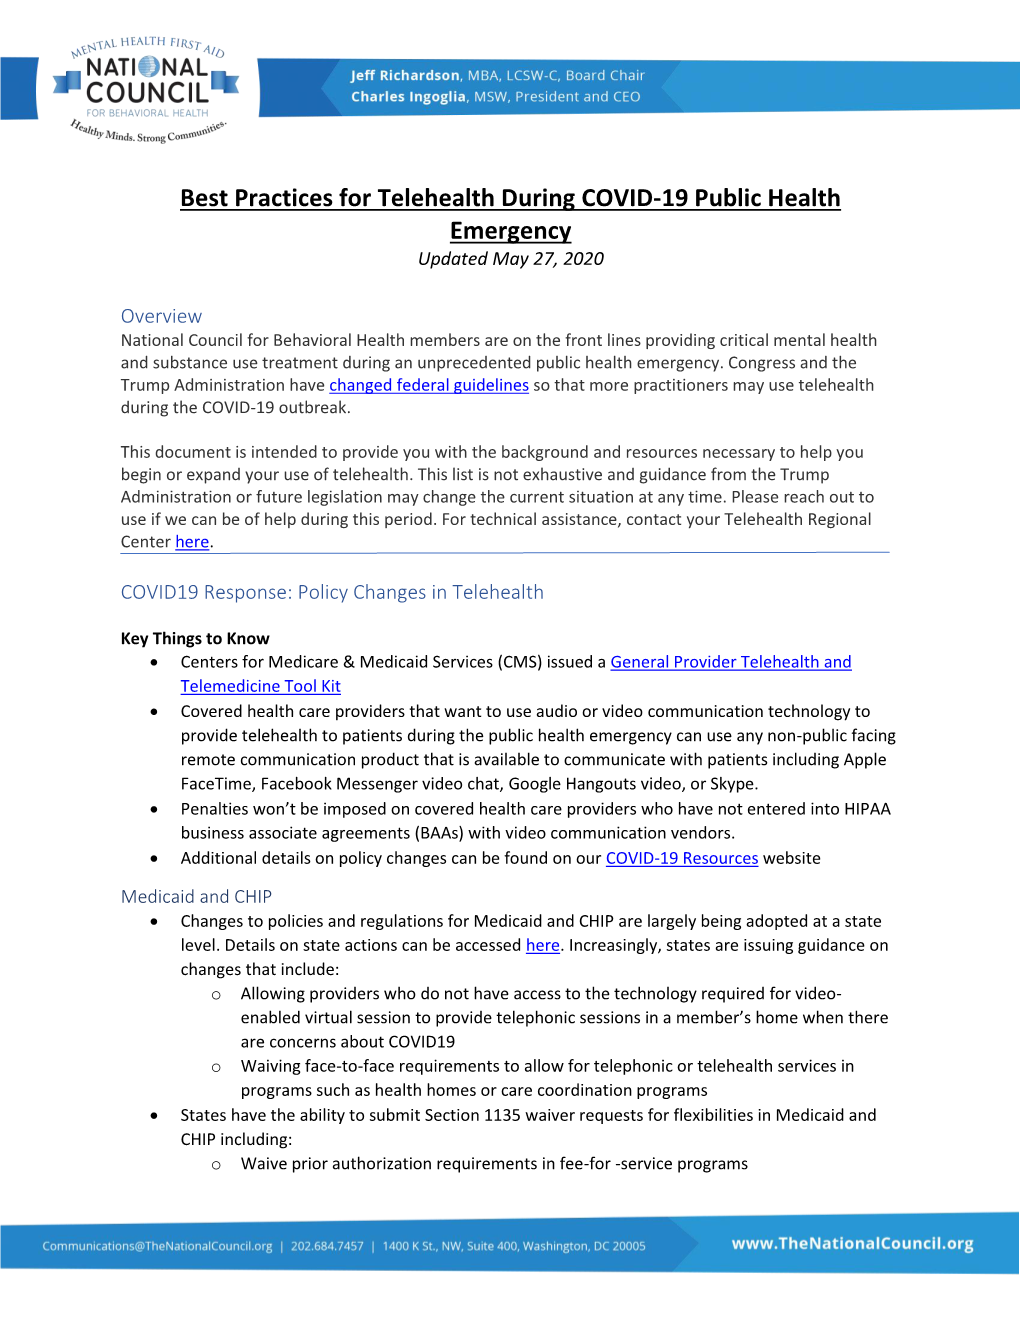 Best Practices for Telehealth During COVID-19 Public Health Emergency Updated May 27, 2020